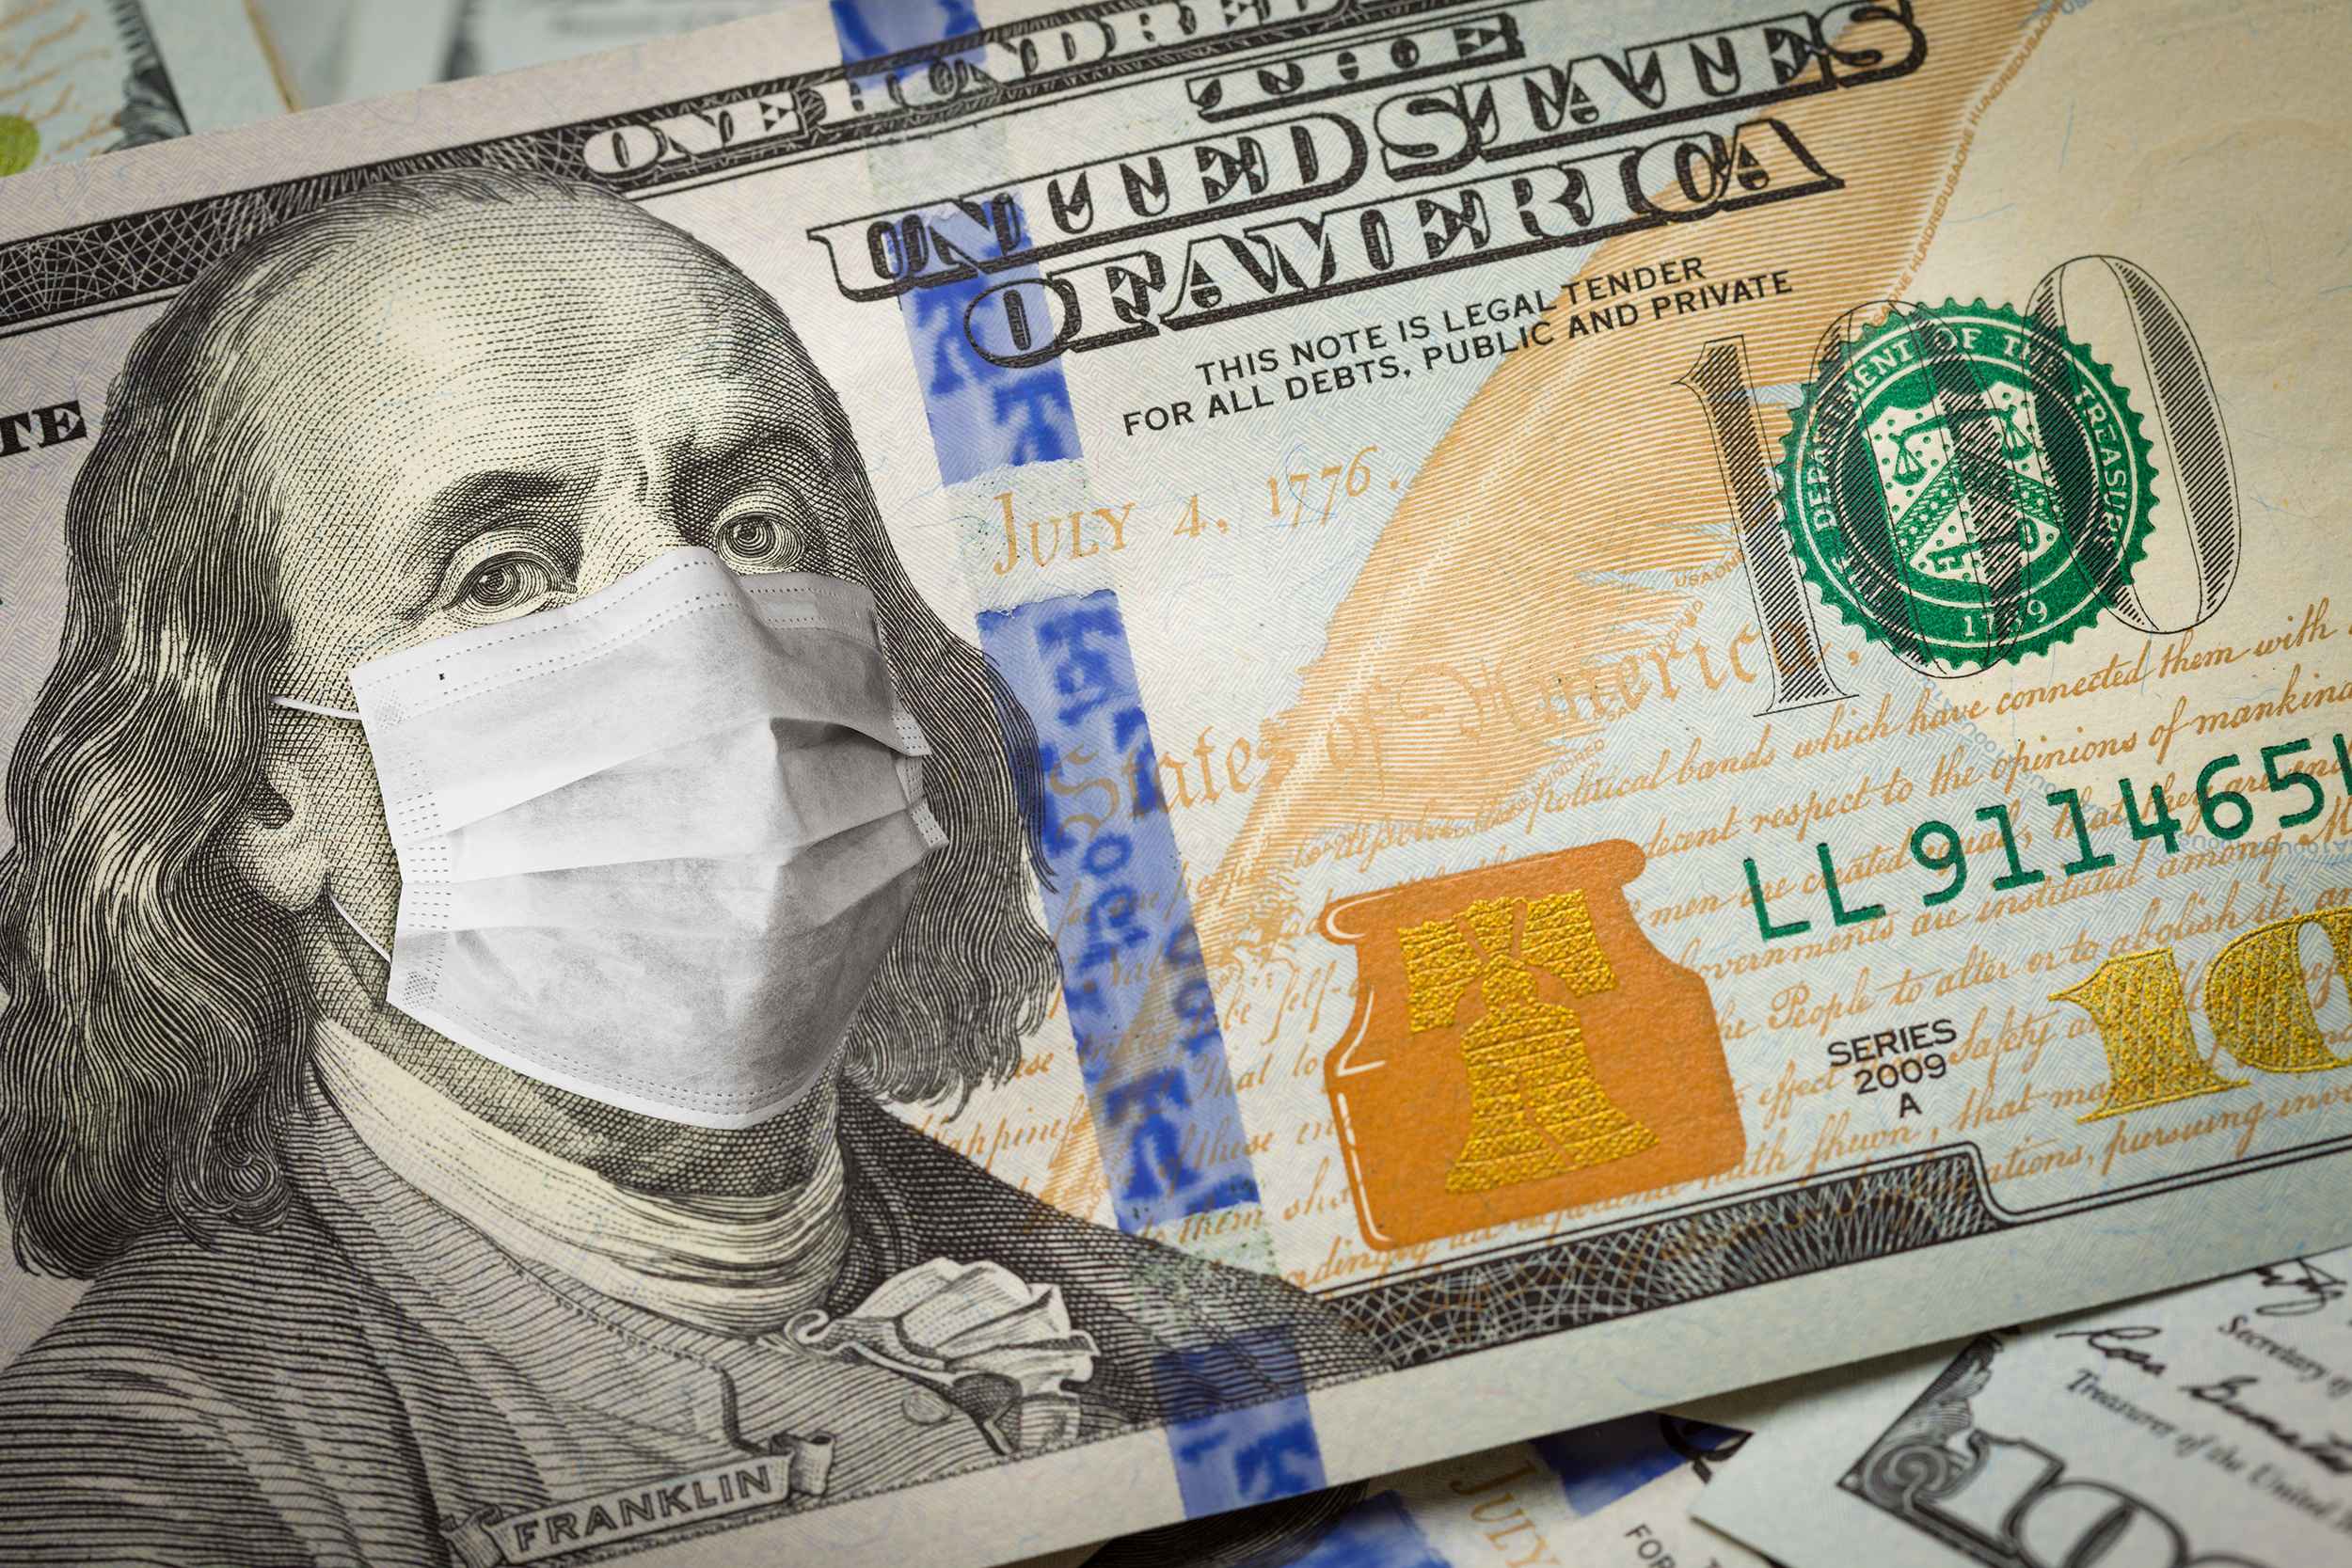 One Hundred Dollar Bill With Medical Face Mask on George Washington.